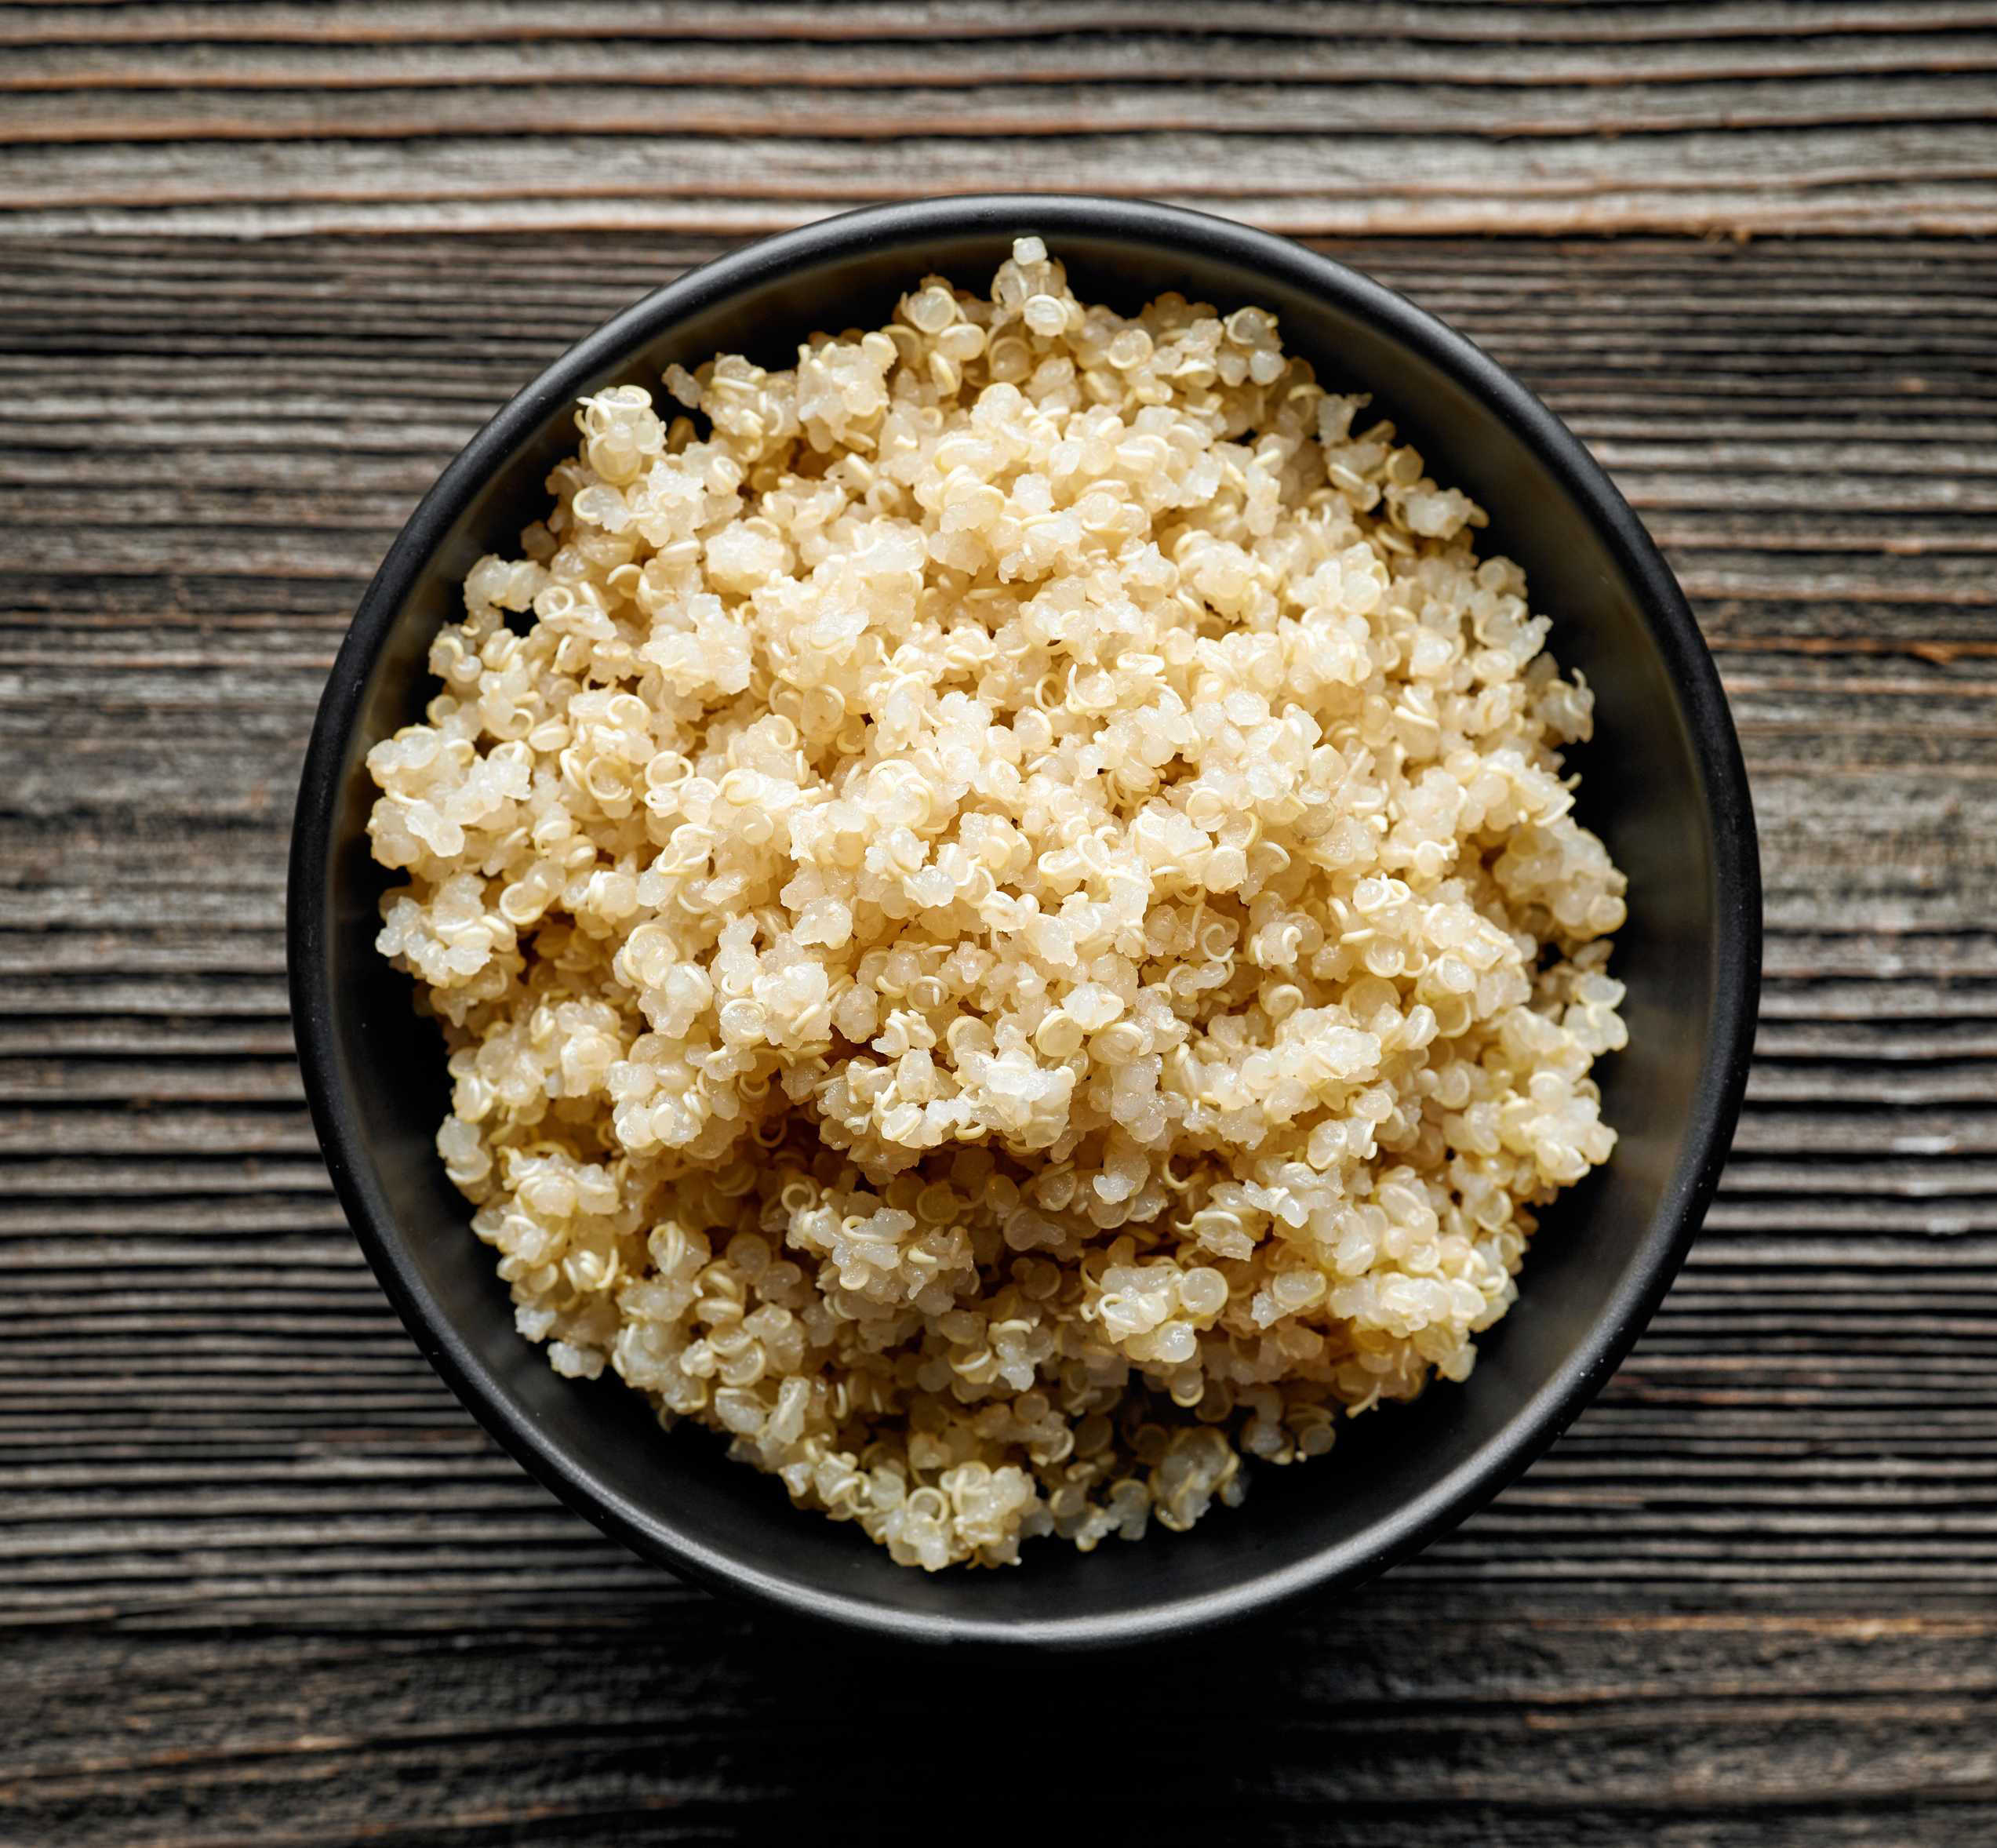 Professional FAQs: What Is The Calorie Or Carb Count For Quinoa?